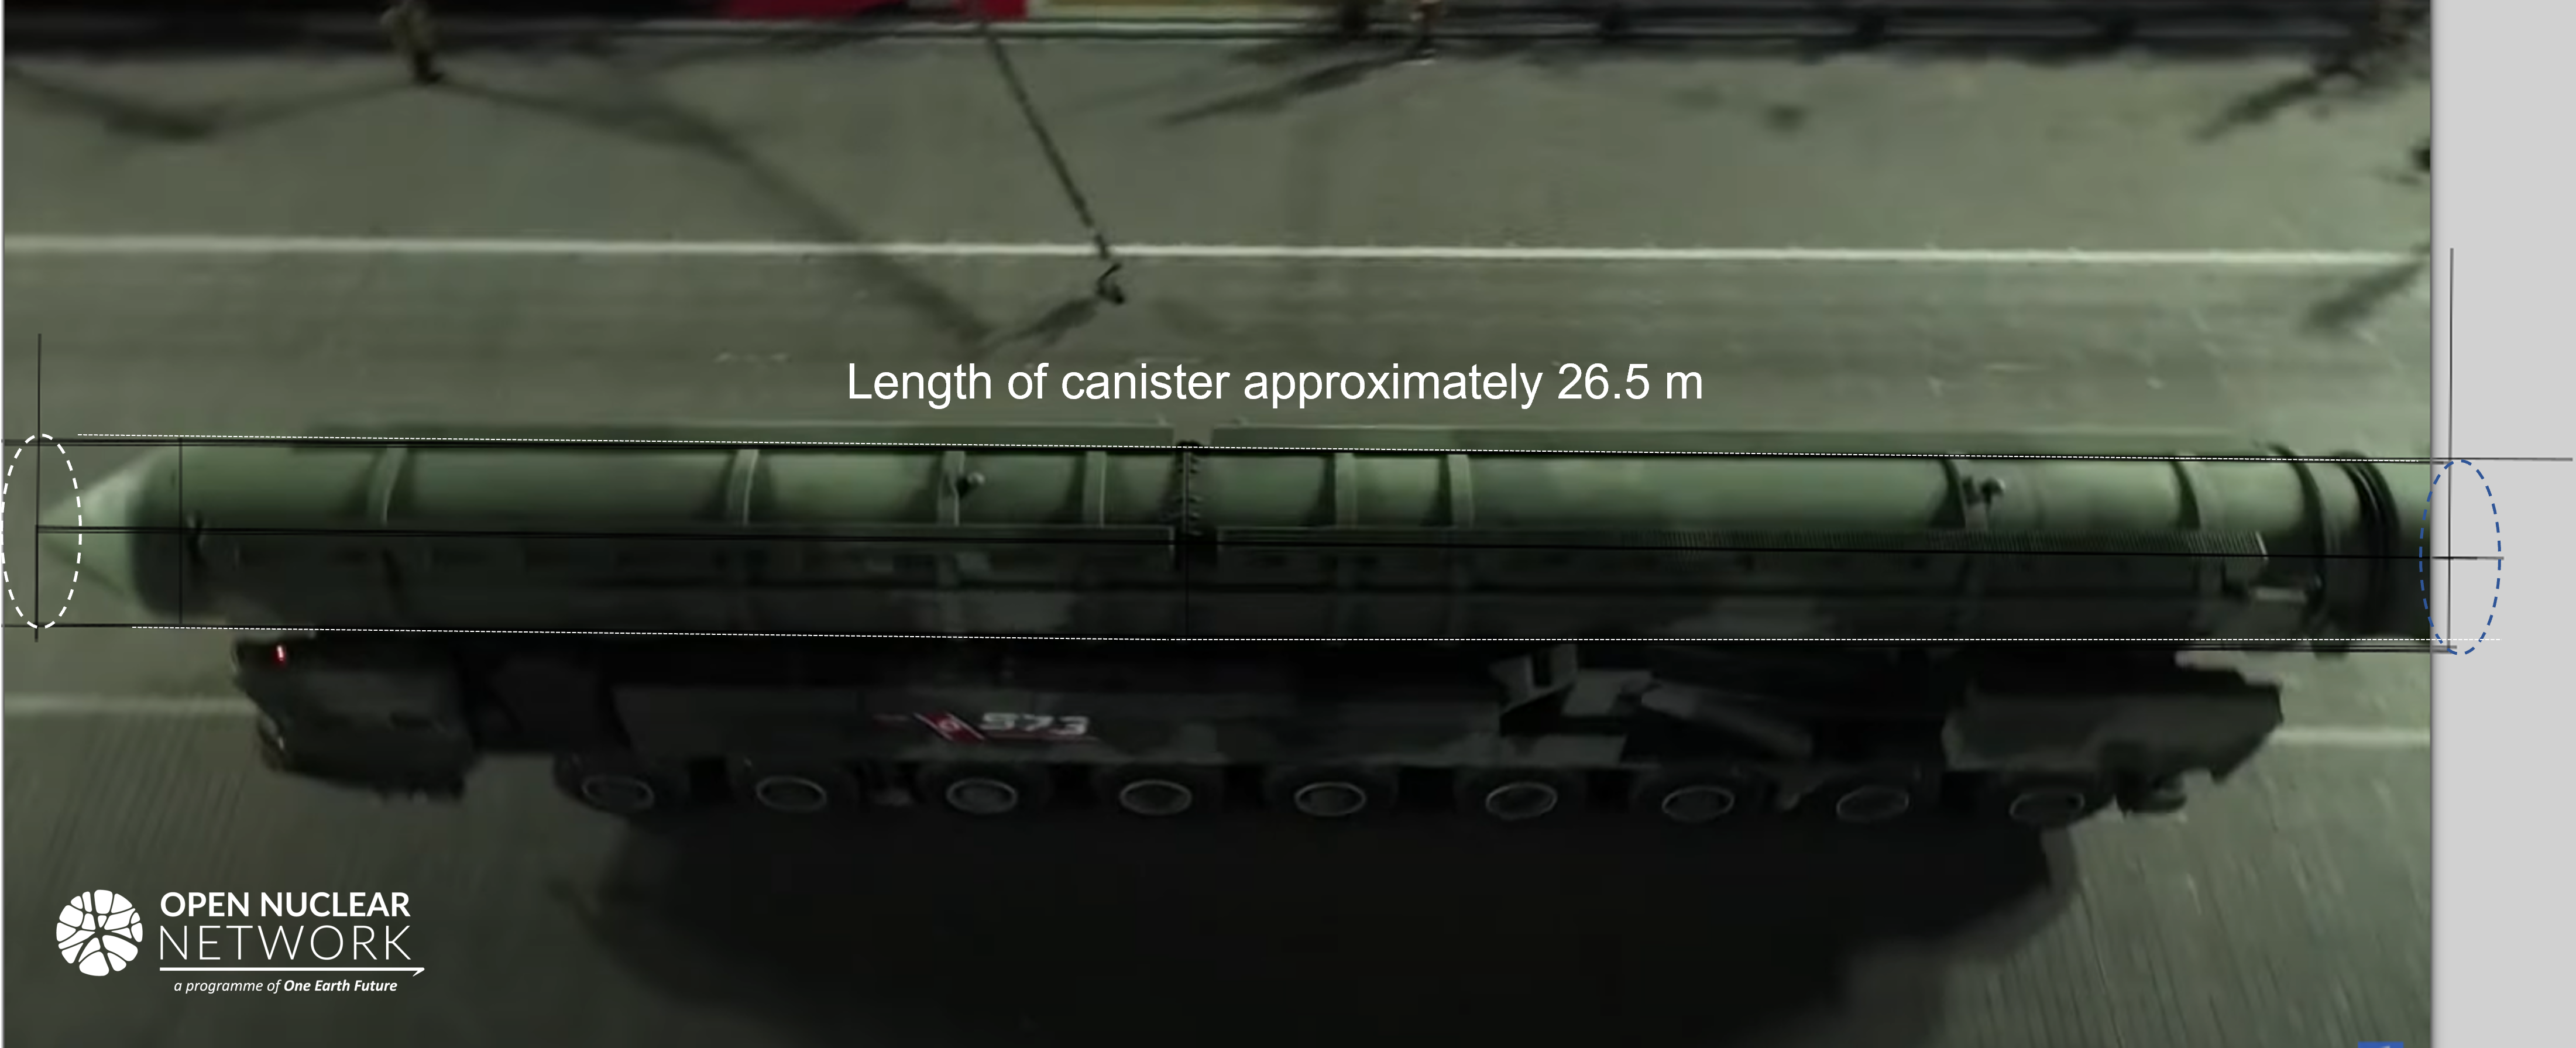 Figure 4. Accordingly, the launch canister is roughly approximately 2.1 m in diameter. 